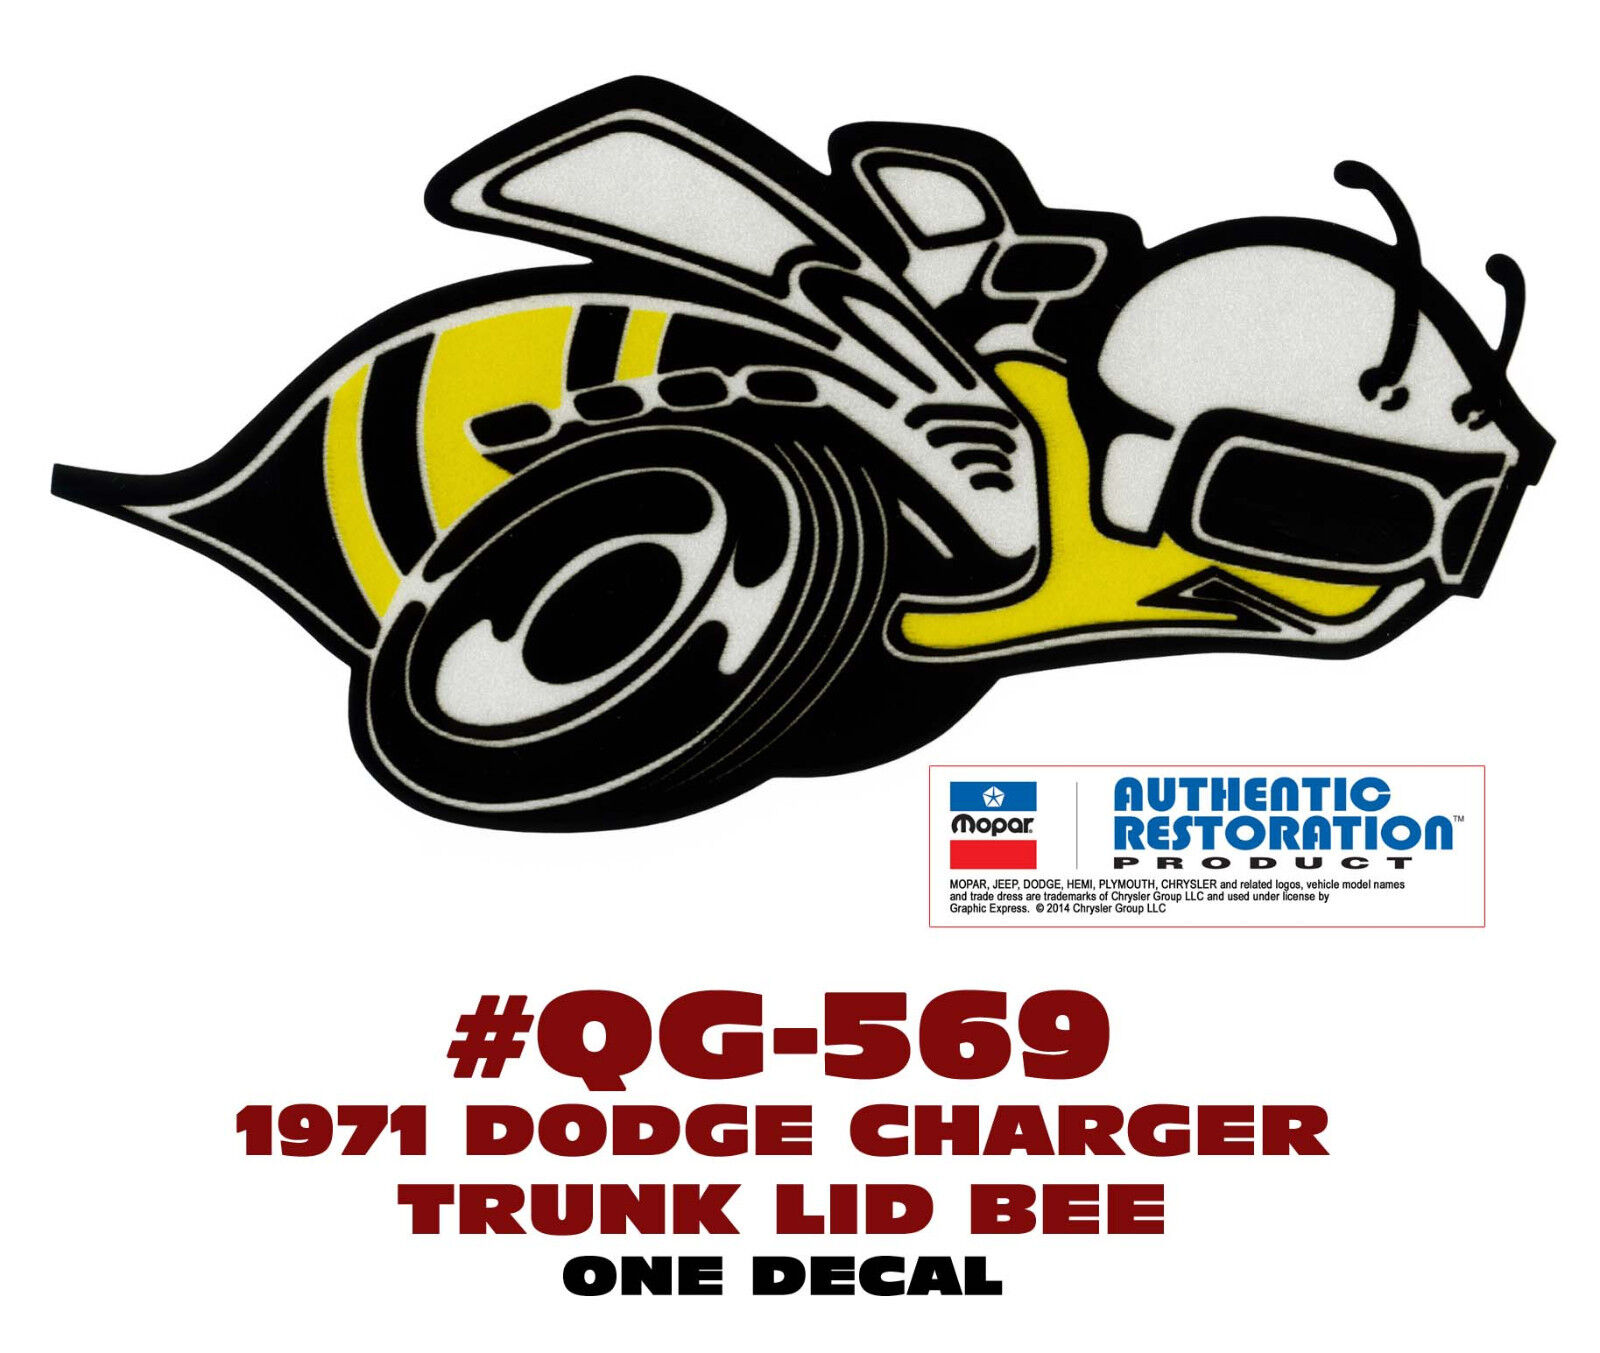 QG-569 1971 DODGE CHARGER - SUPER BEE TRUNK BEE - REFLECTIVE DECAL - ONE